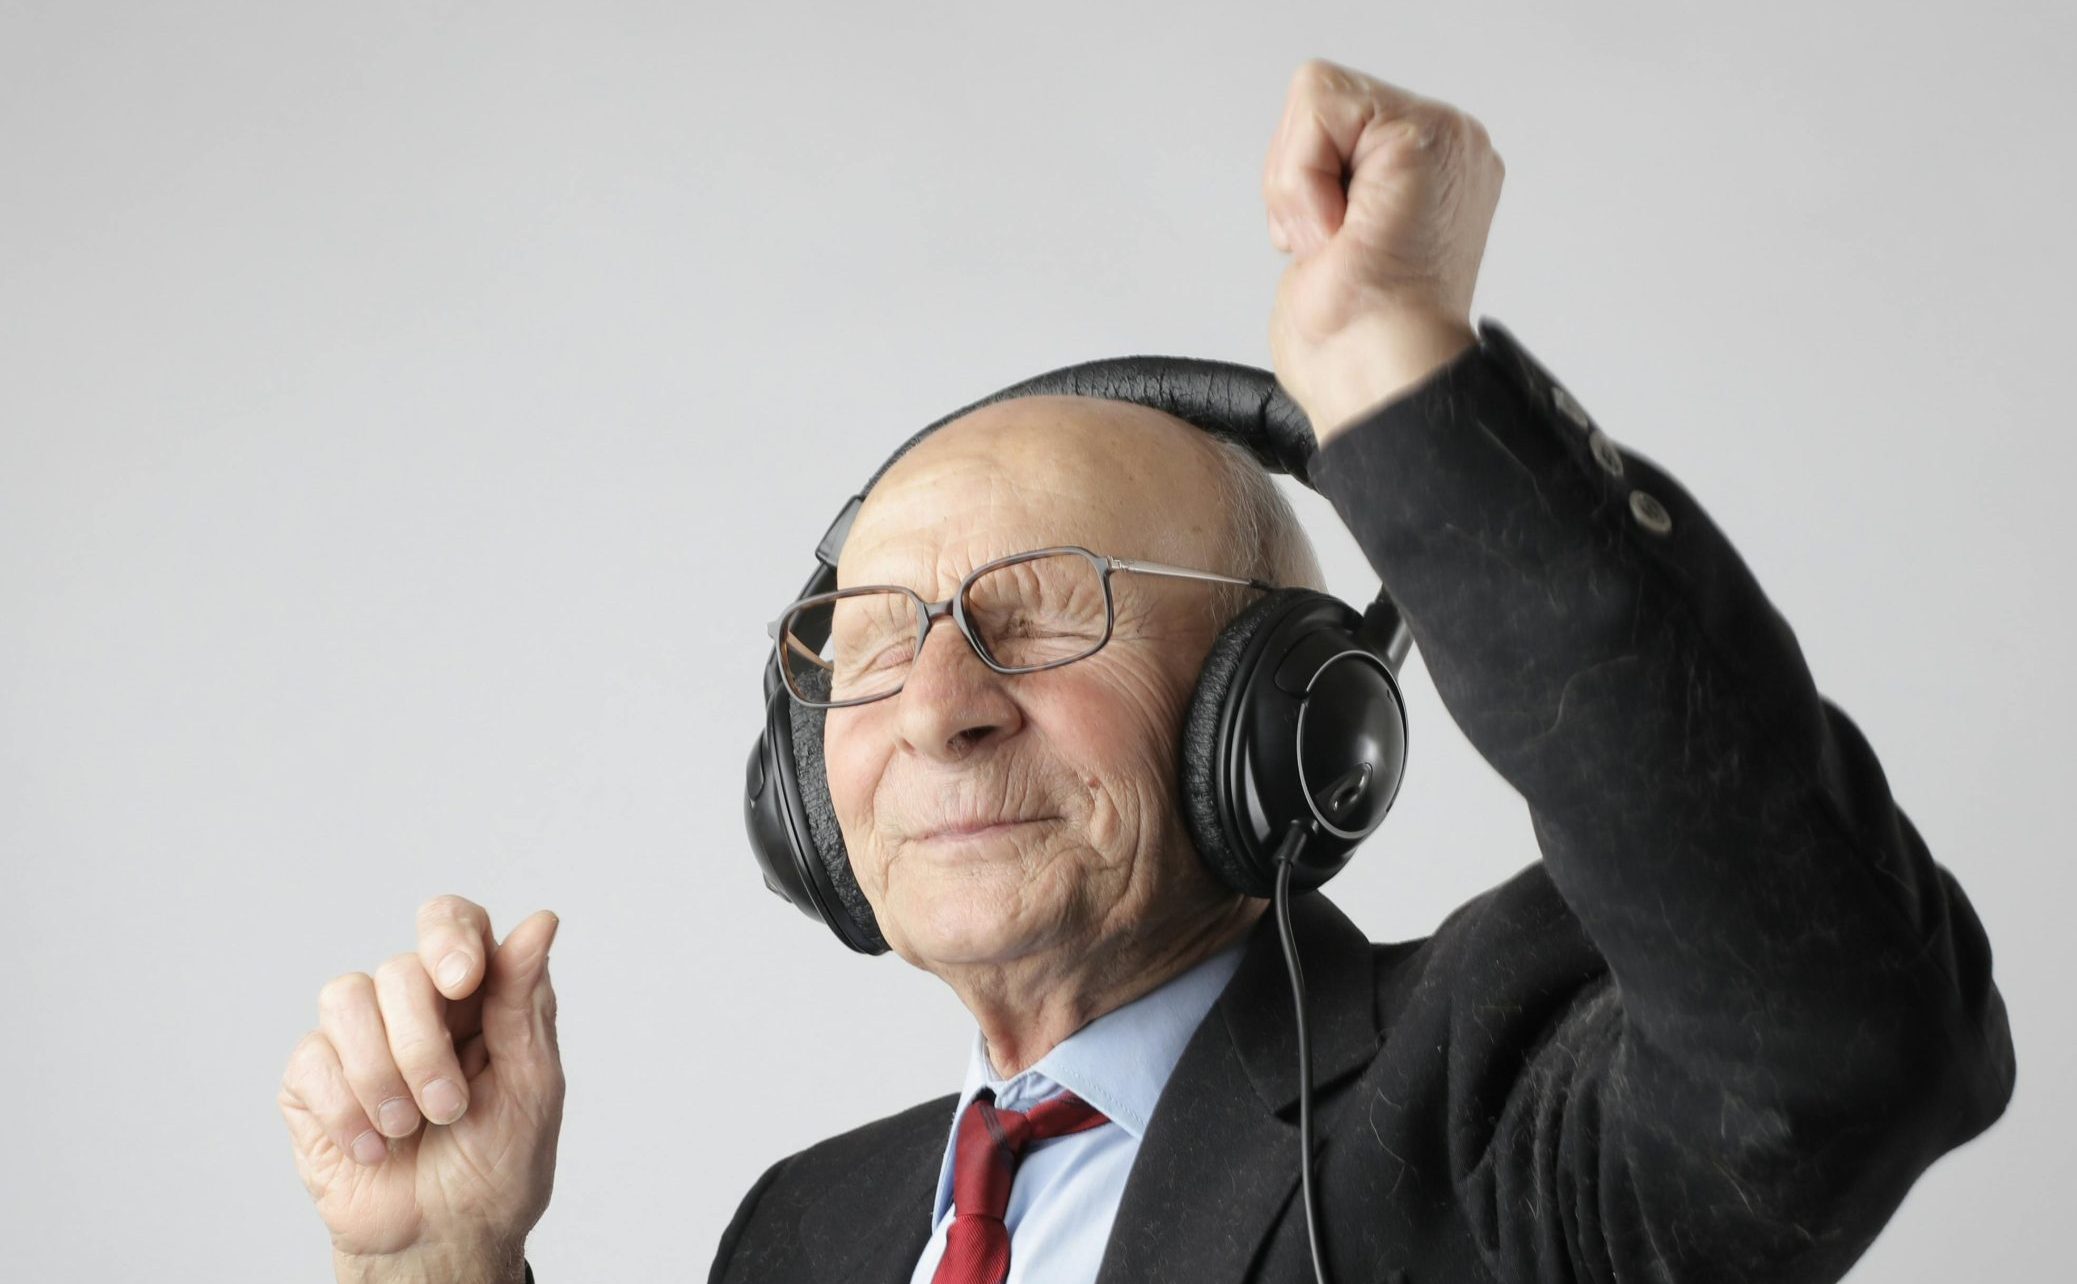 Dementia alliance launches music therapy program for community